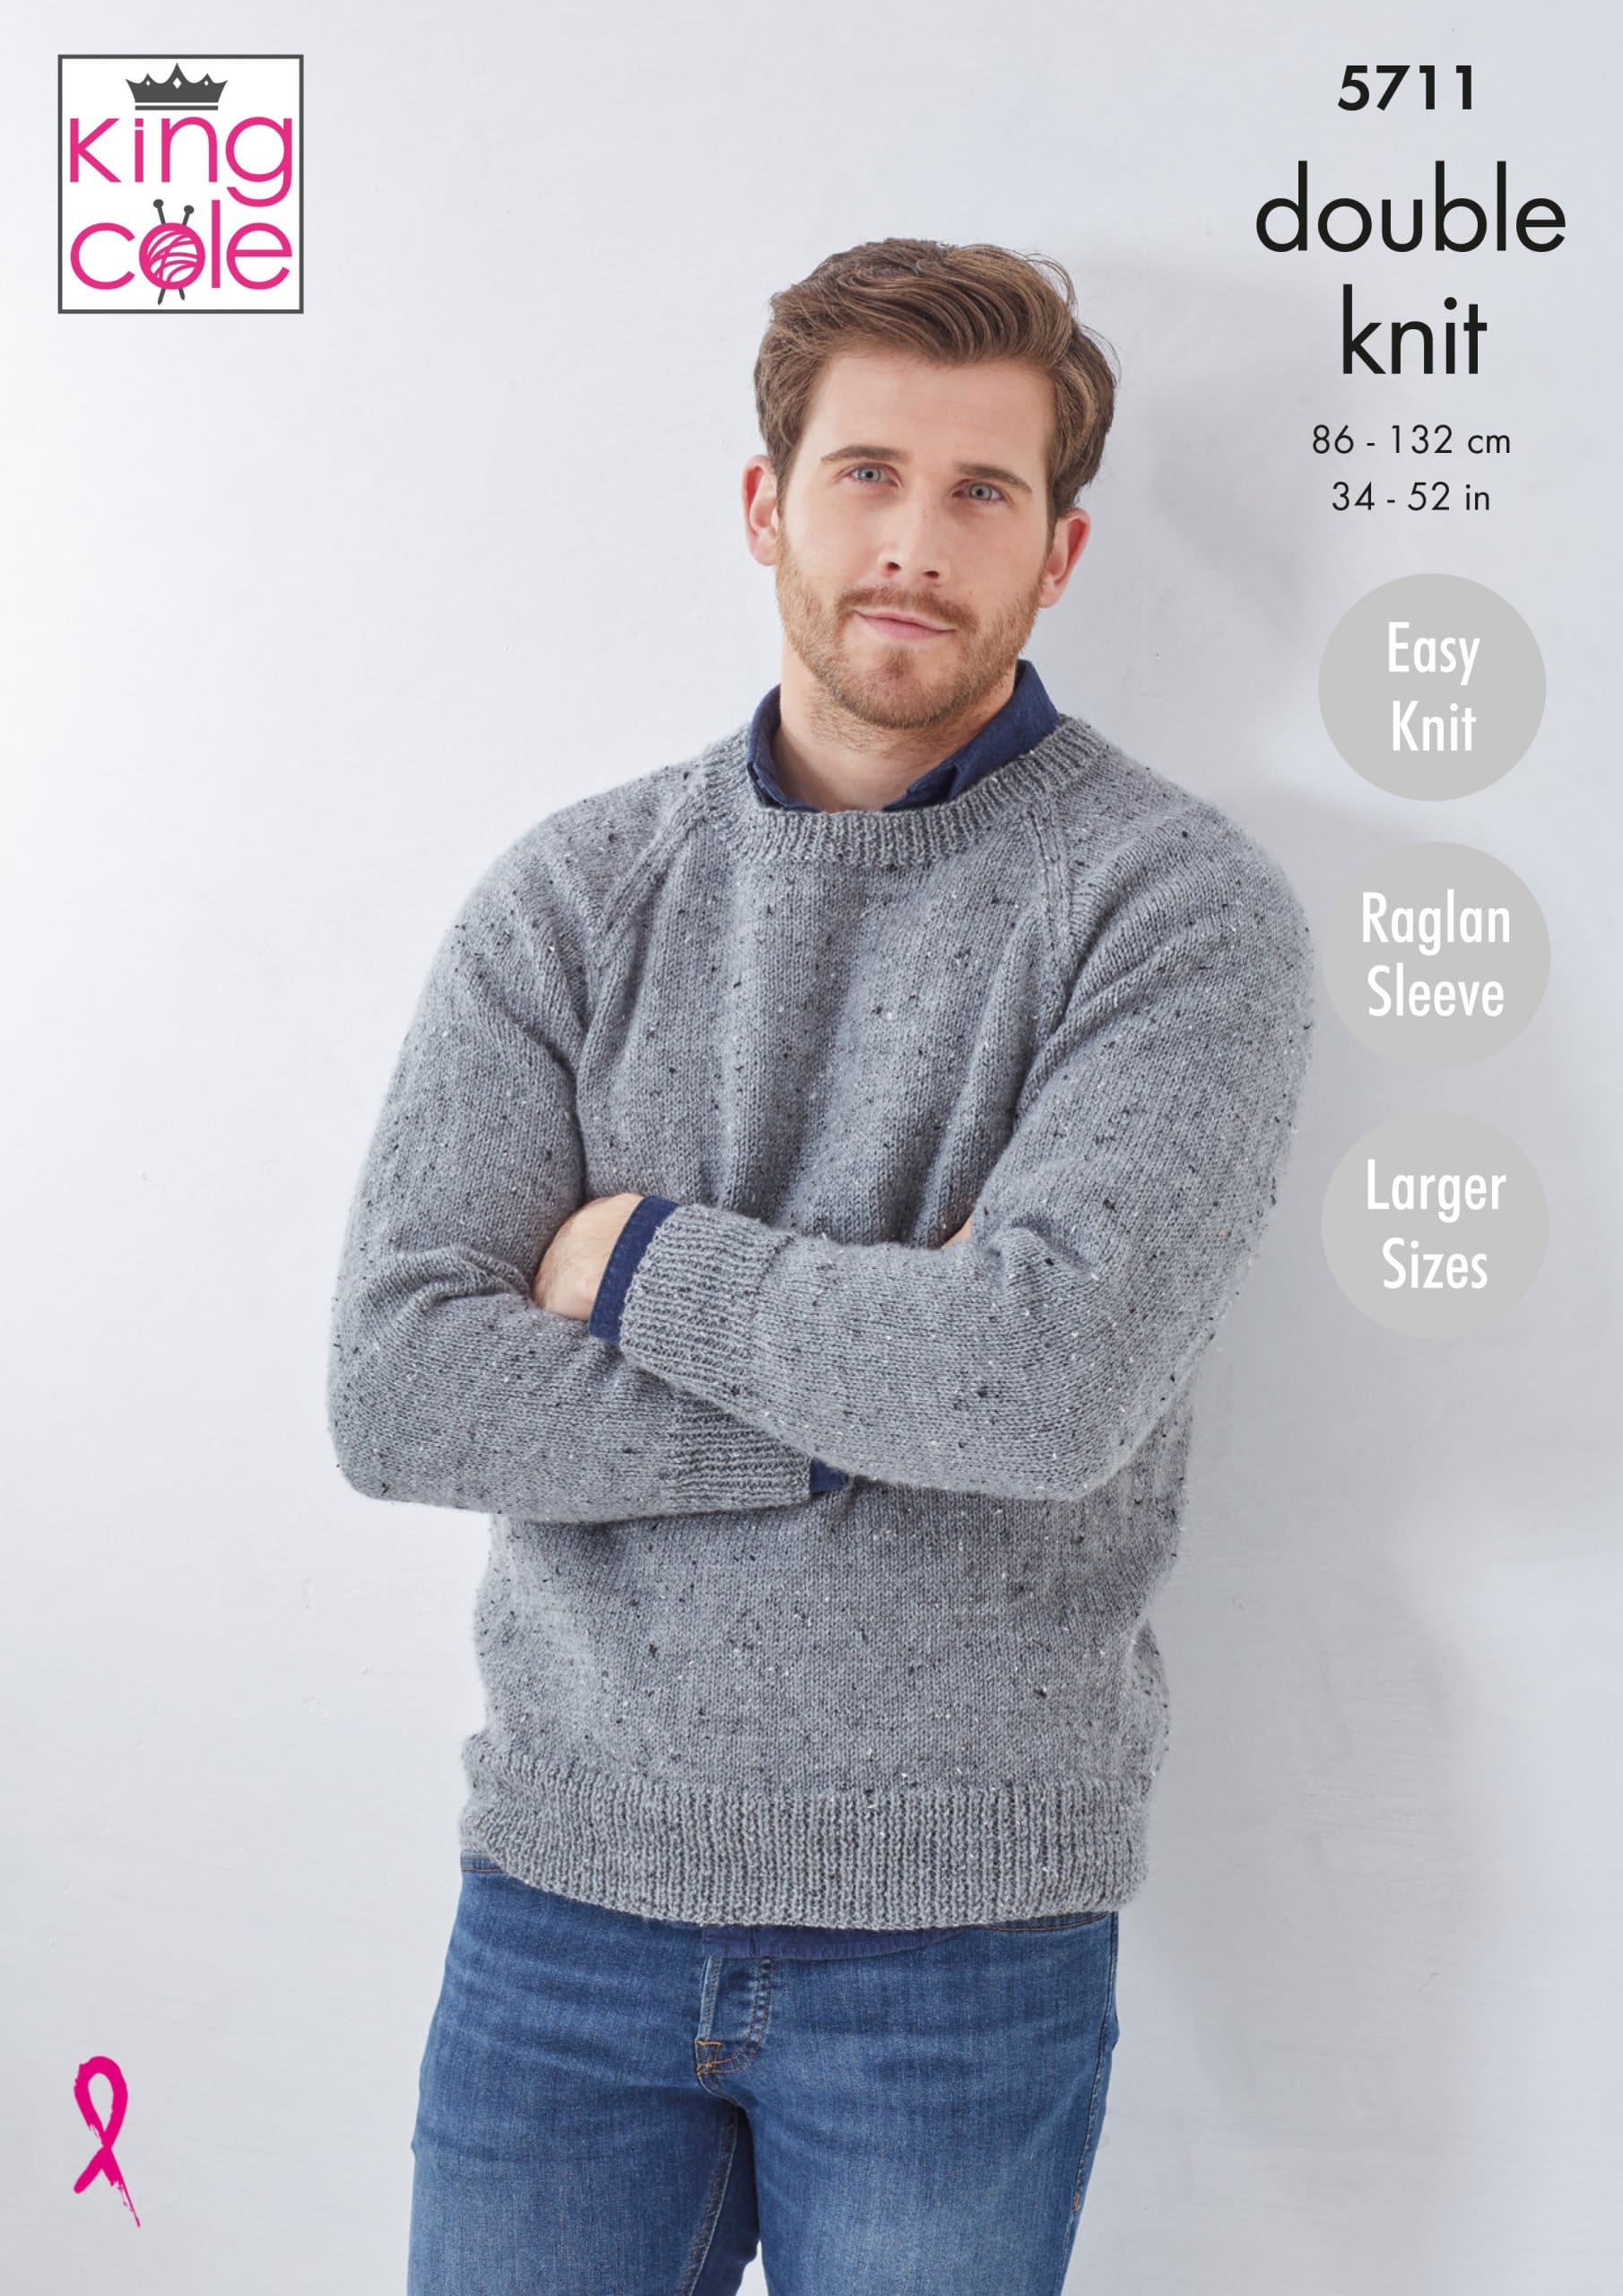 Easy to Follow Cardigan & Sweater Knitted in Big Value Tweed DK ...